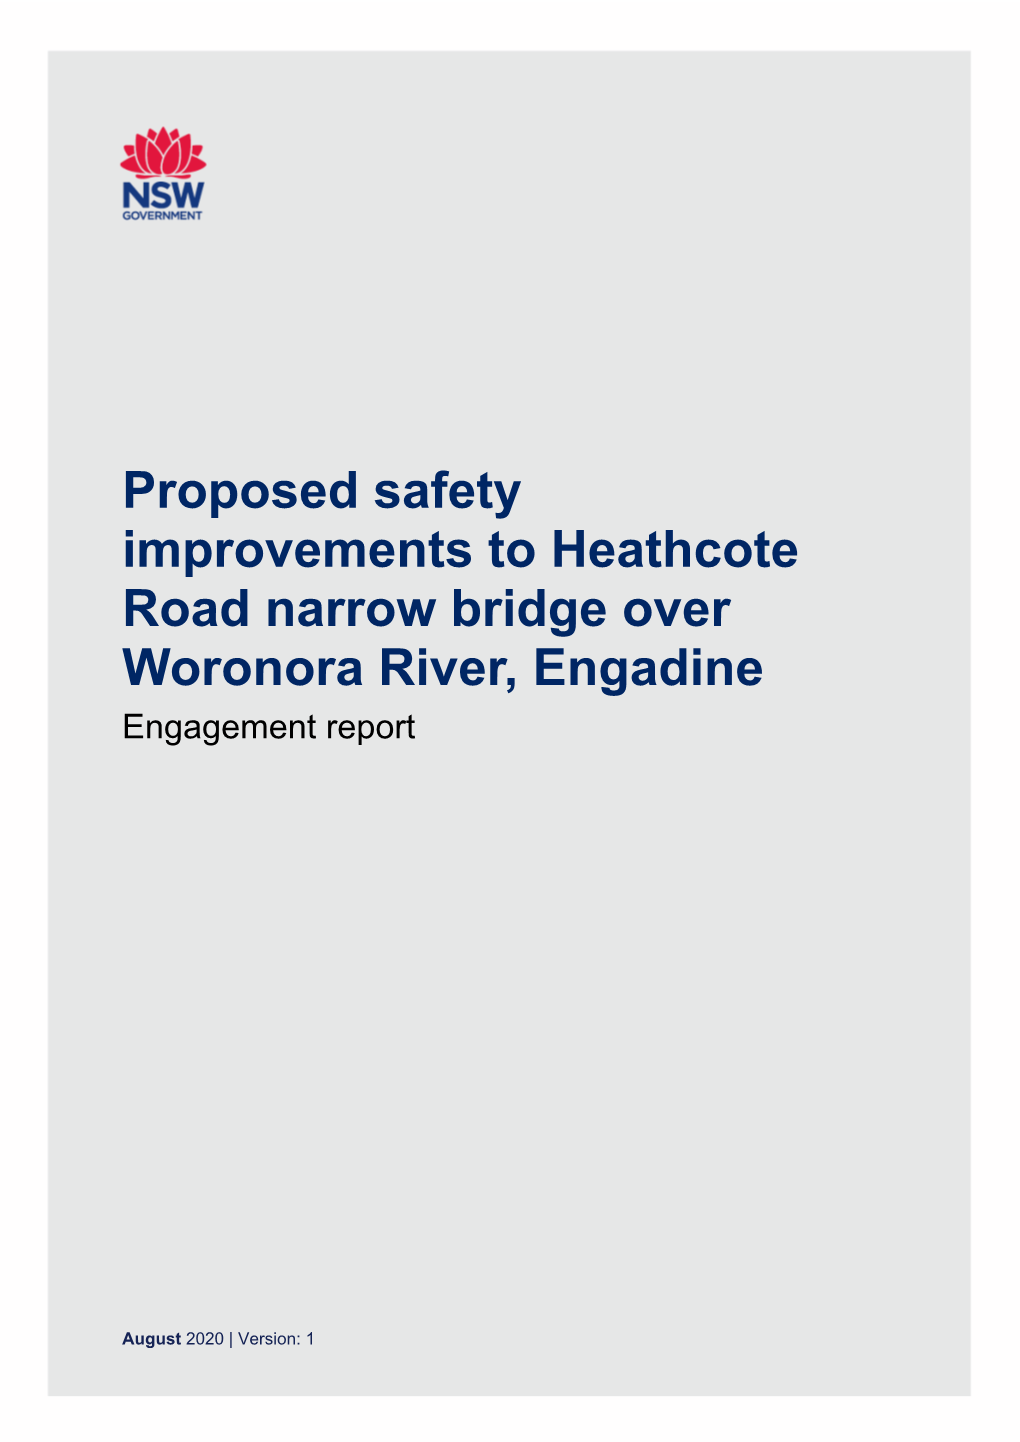 Proposed Safety Improvements to Heathcote Road Narrow Bridge Over Woronora River, Engadine Engagement Report